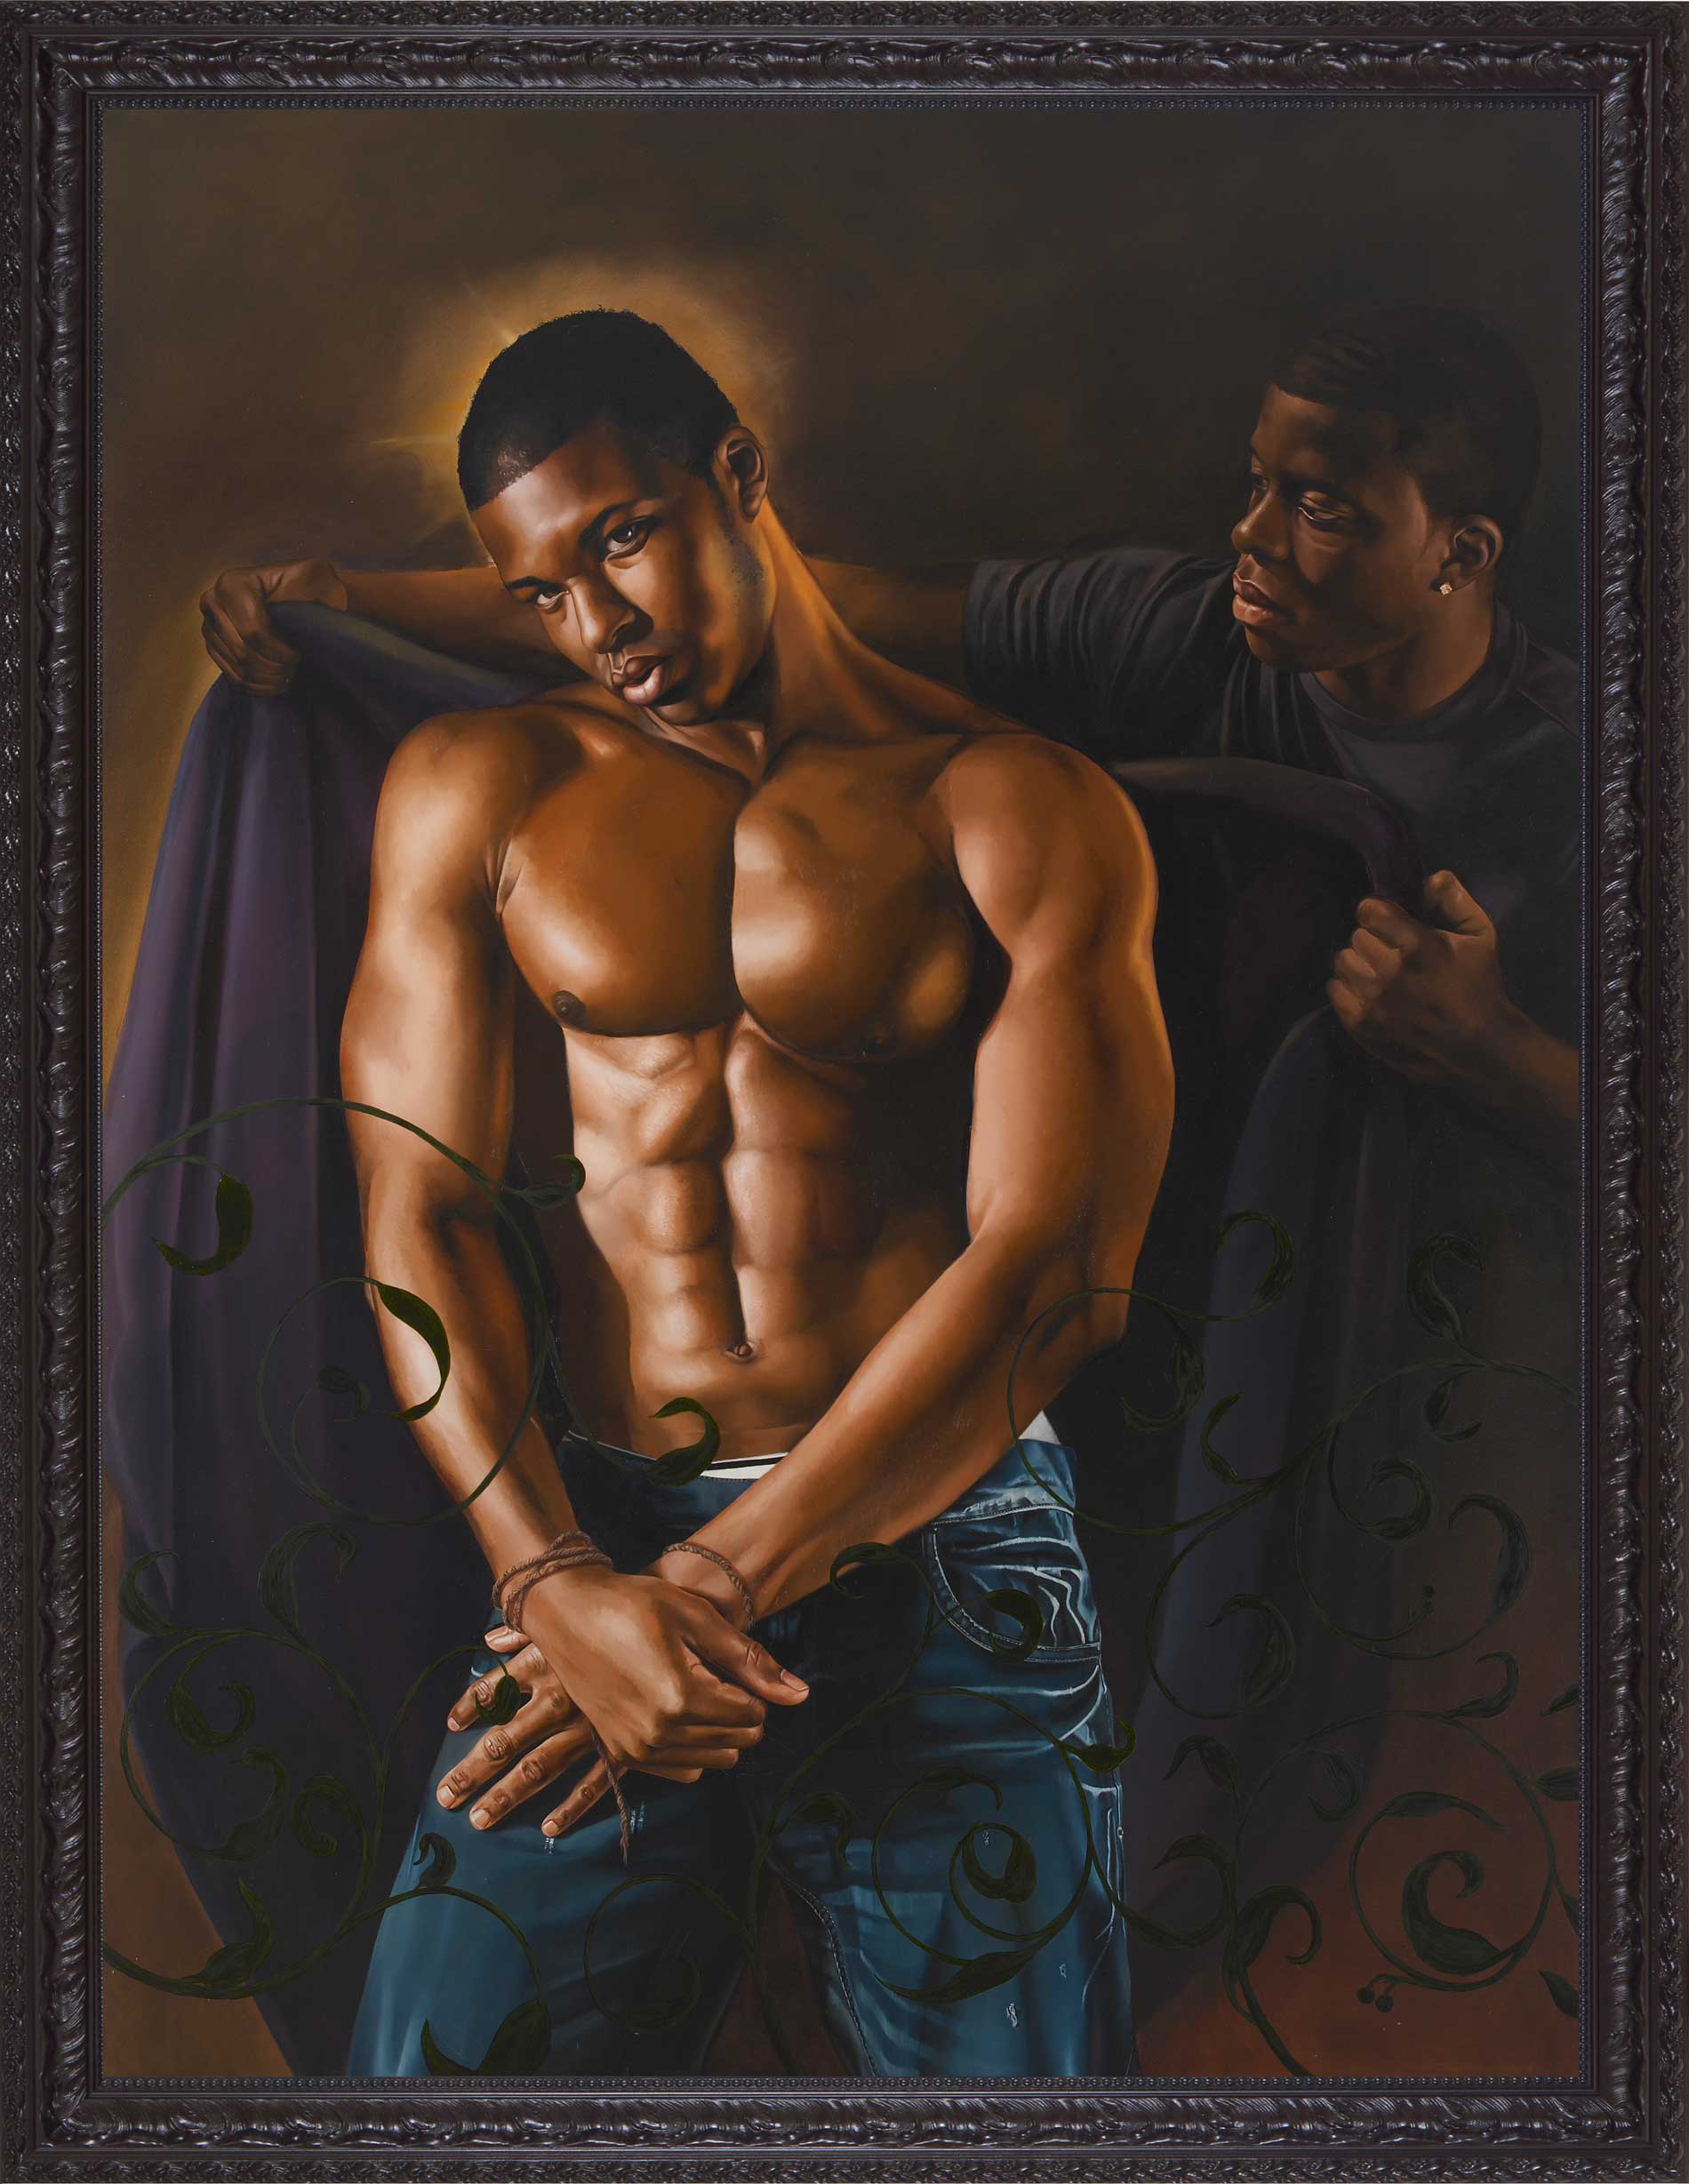 Kehinde Wiley | Selected Works: 2009 | Ecce Homo, 2009 Oil on Canvas.  | 5